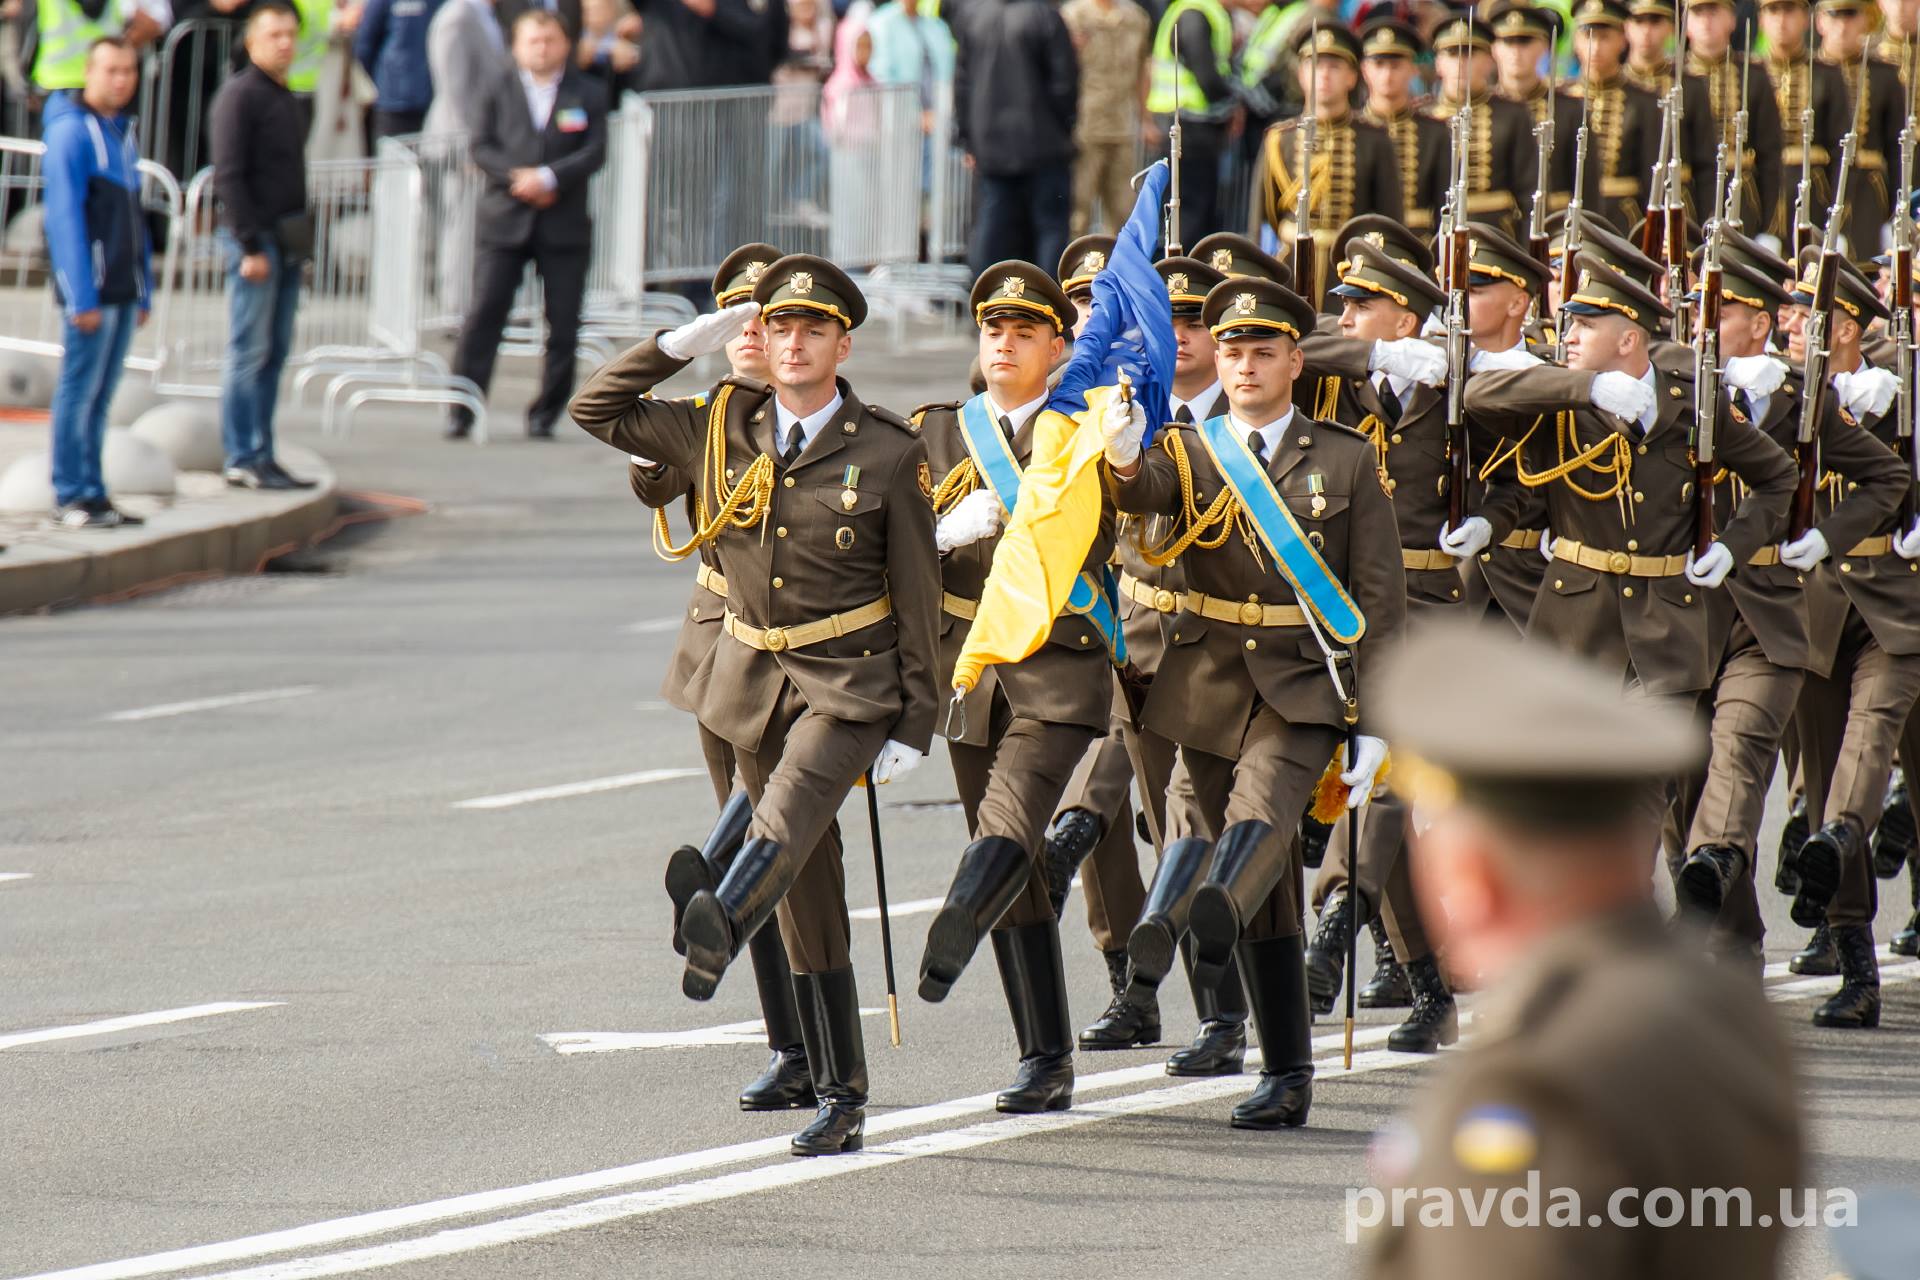 Divisions from eight NATO countries attend military parade on Ukraine's